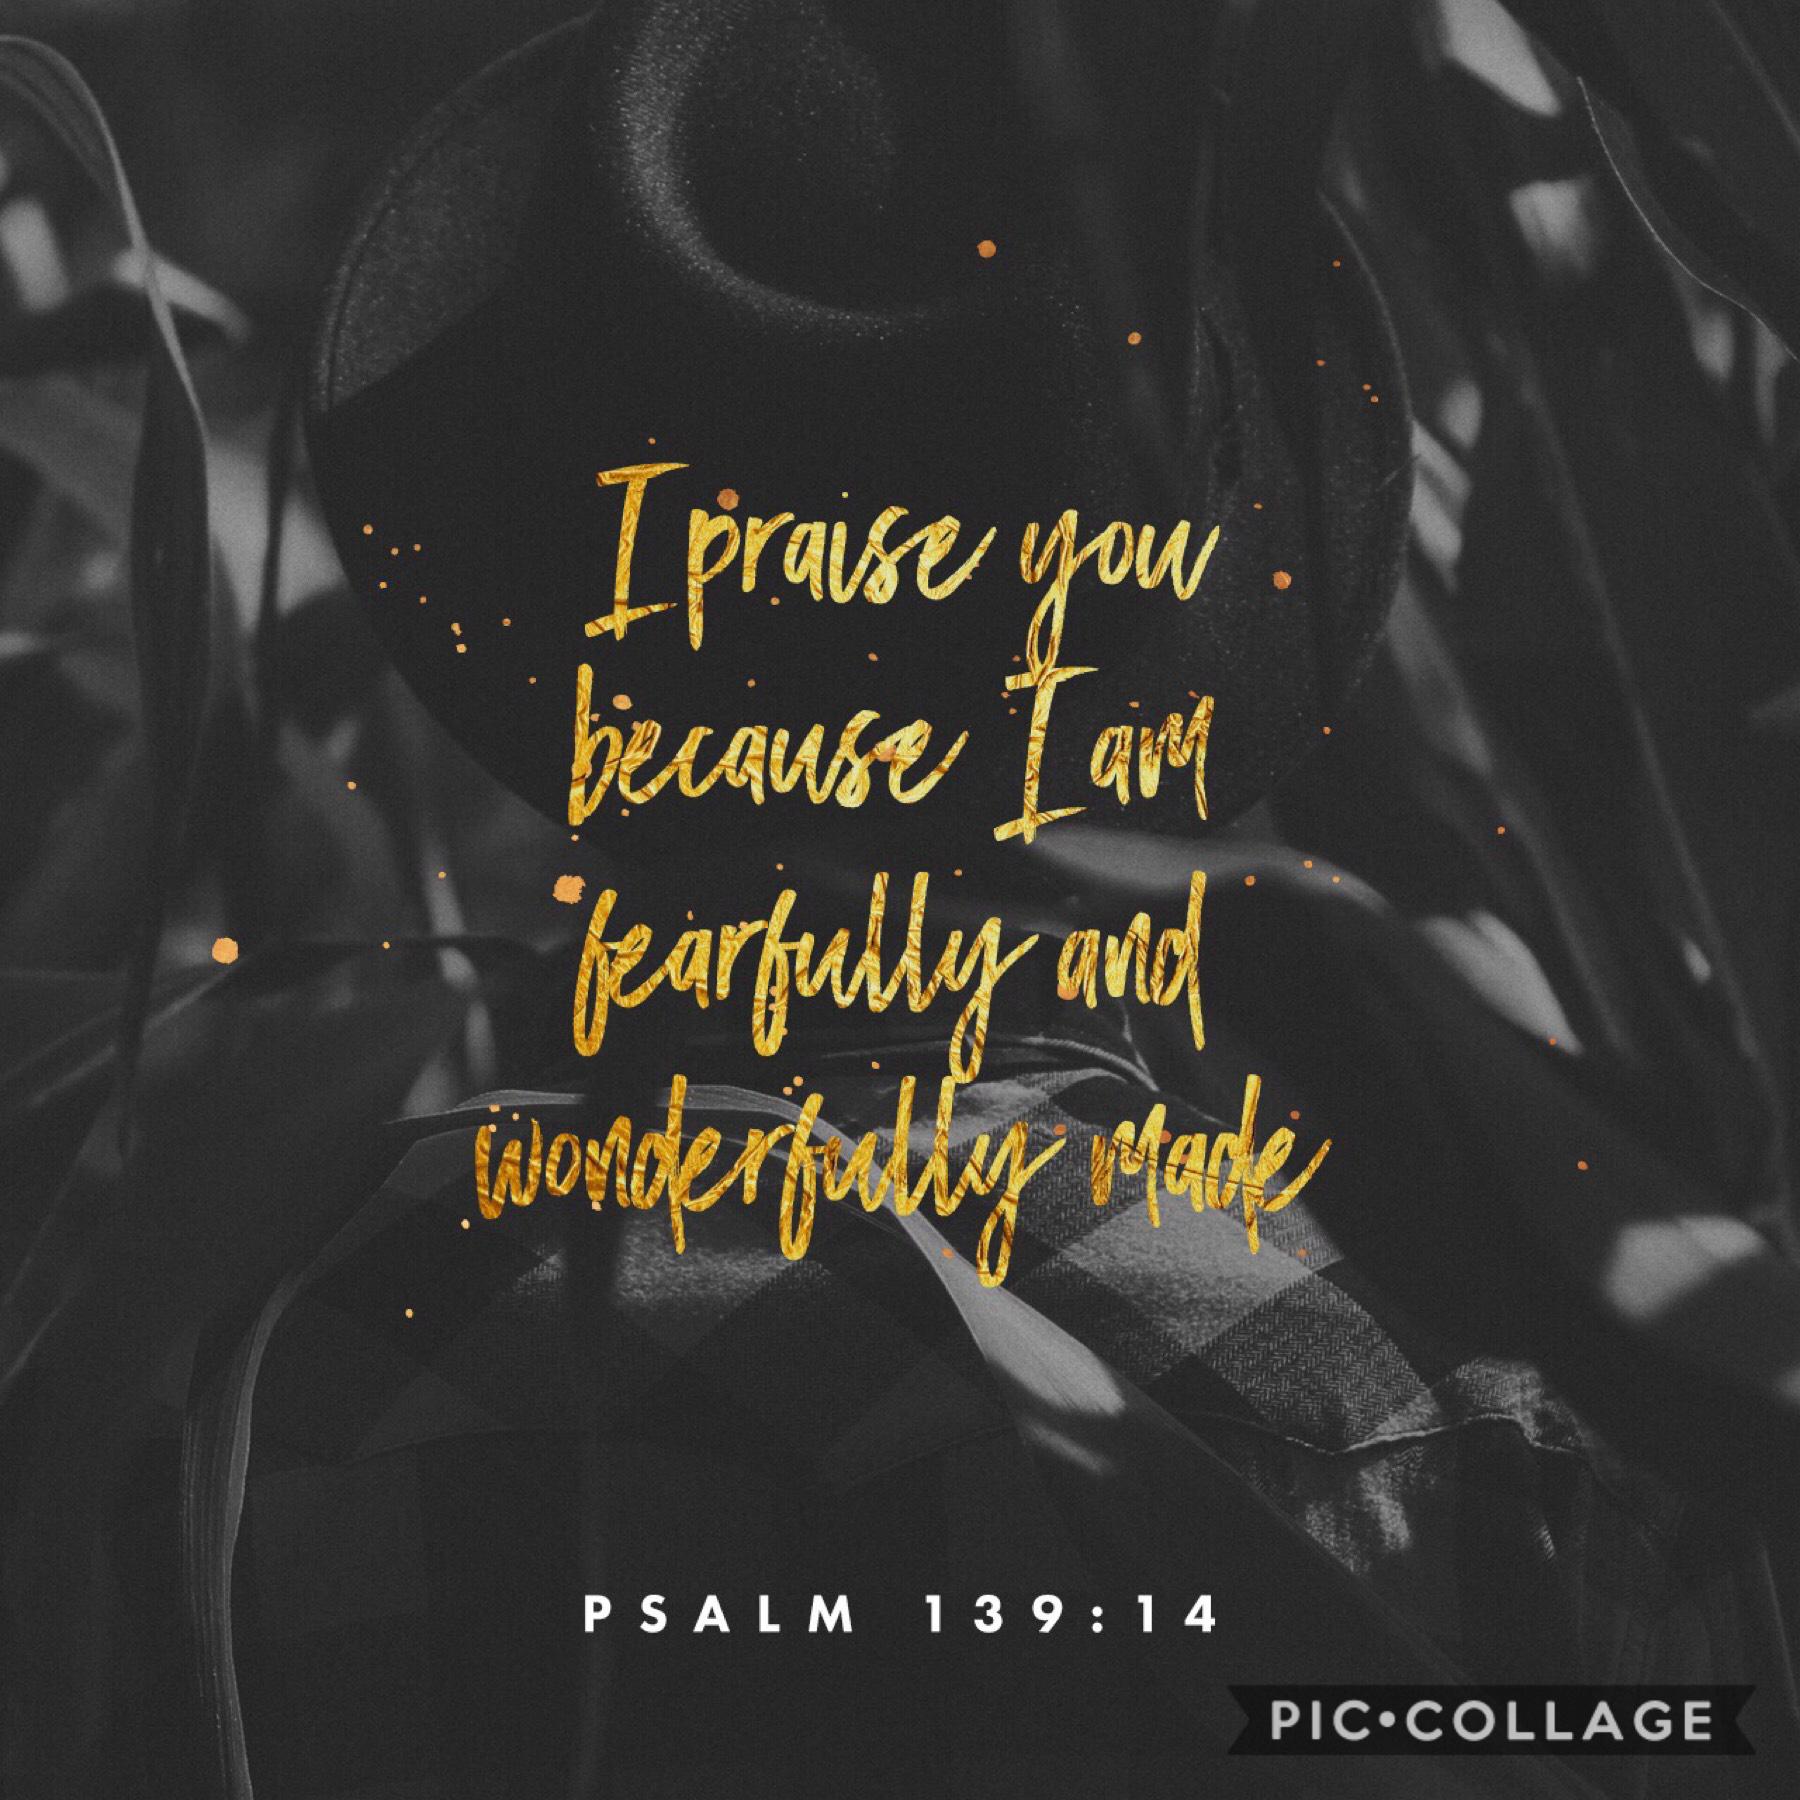 Where I got my username from! Absolutely love this verse! Tap

REMEMBER YOU ARE WONDERFULLY MADE!
Have a blessed day!
-wonderfully_made